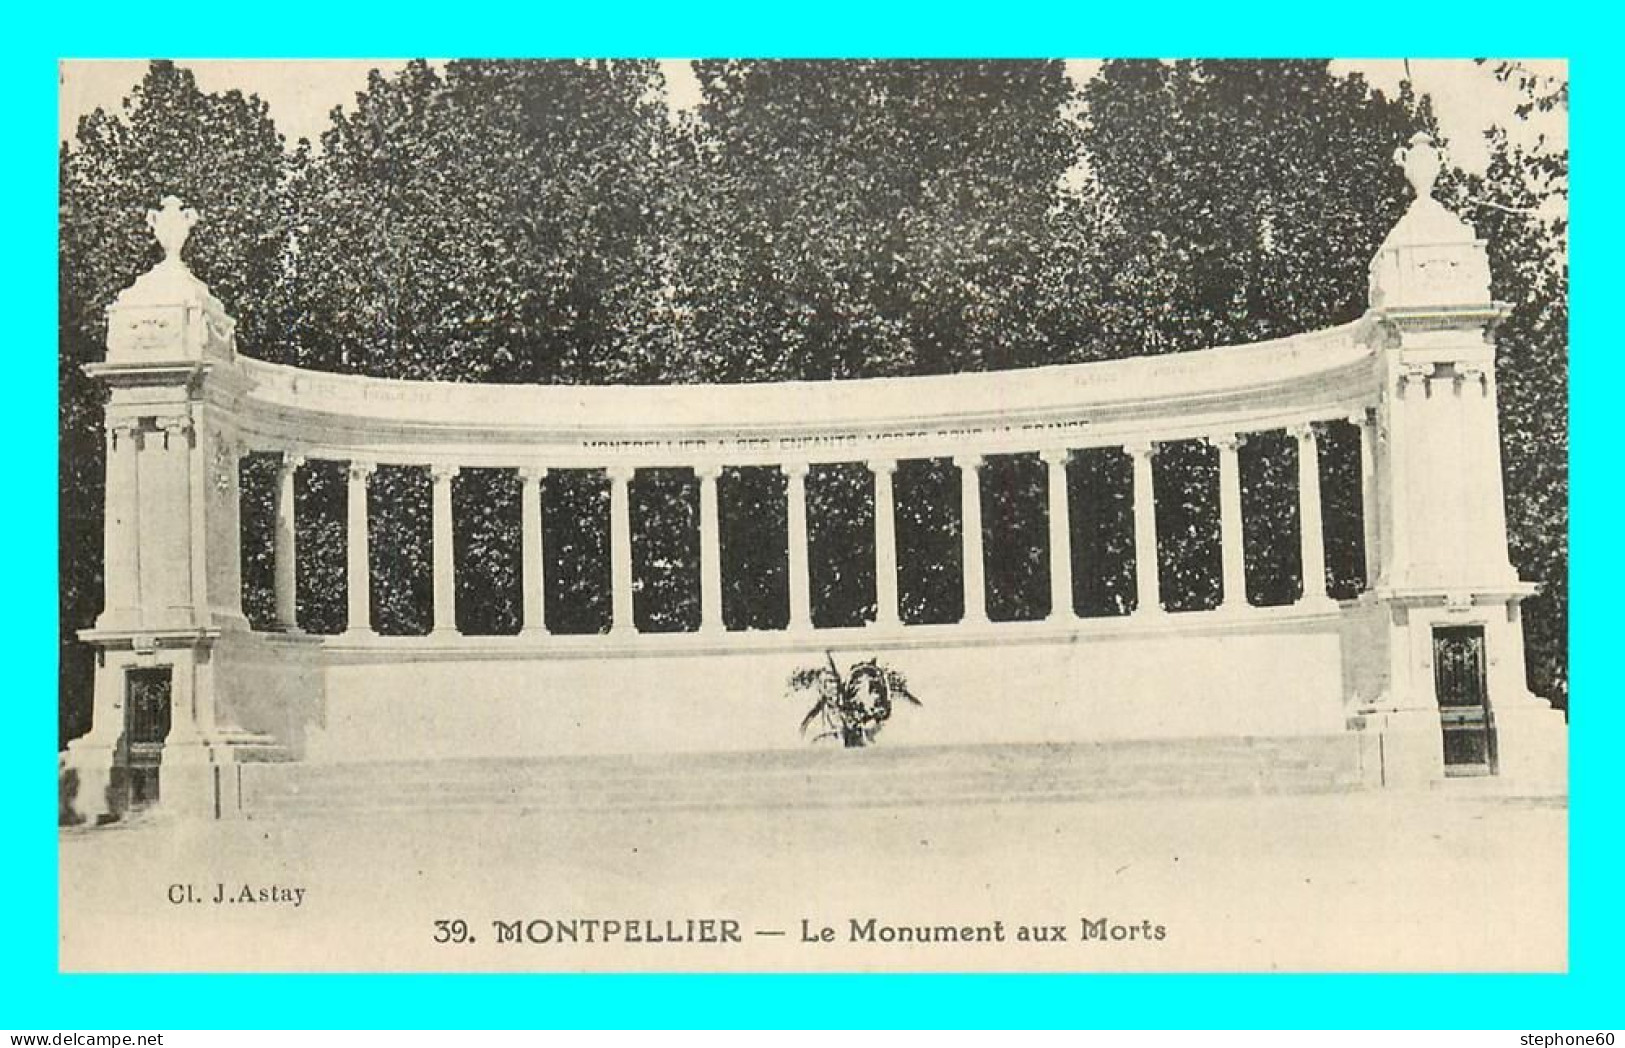 1lo - a282   Lot de 100 CPA / CPSM format CPA HERAULT 34 principalement MONTPELLIERS